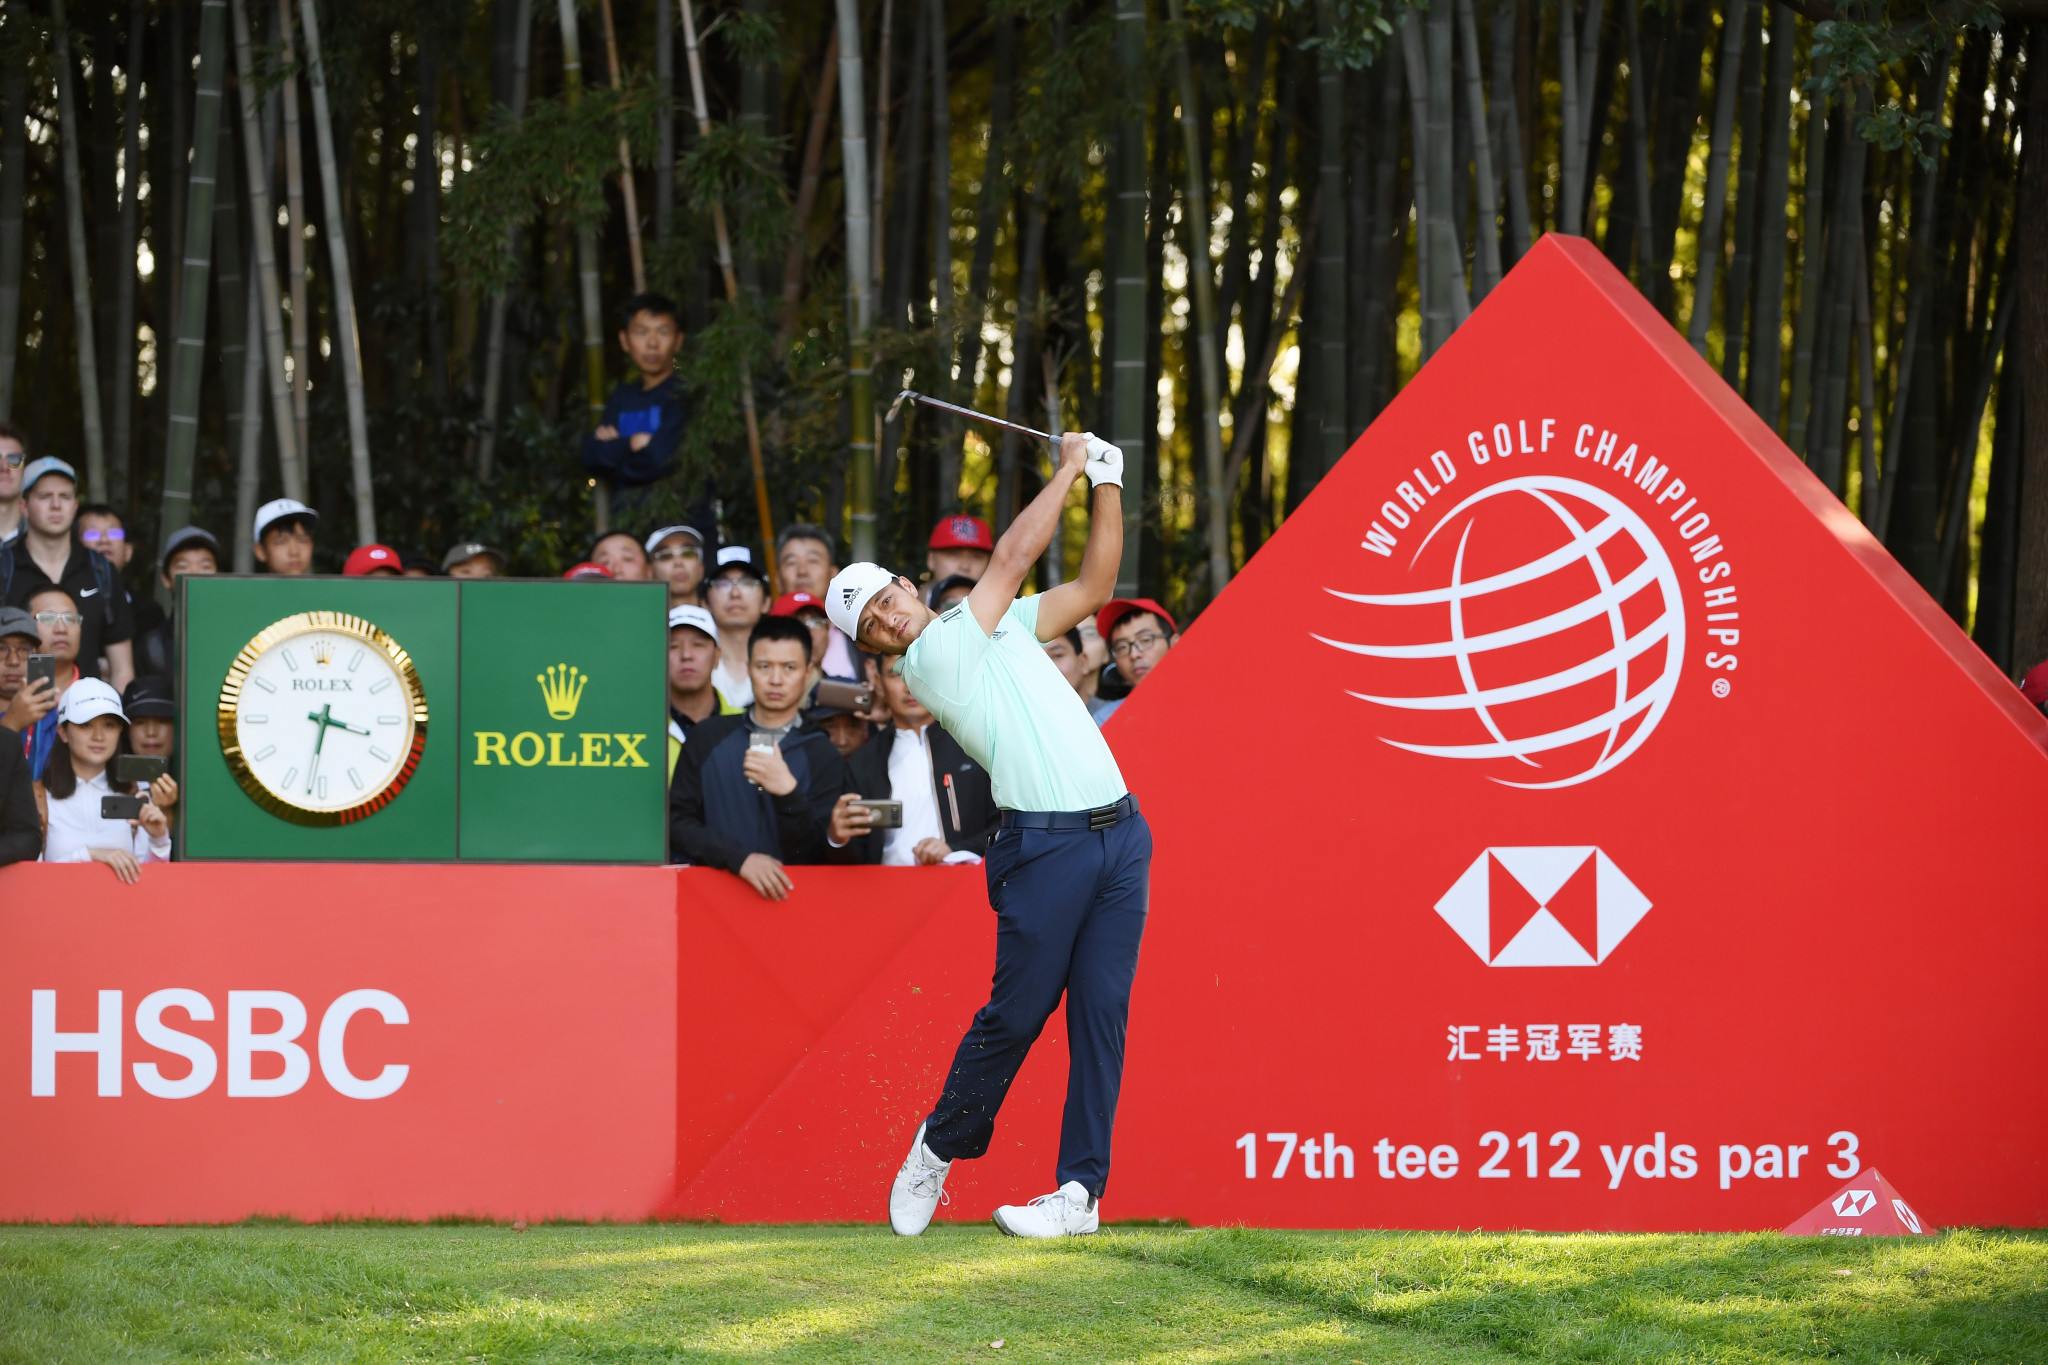 Xander Schauffele birdied the last two holes to force a play-off in Shanghai ©Getty Images